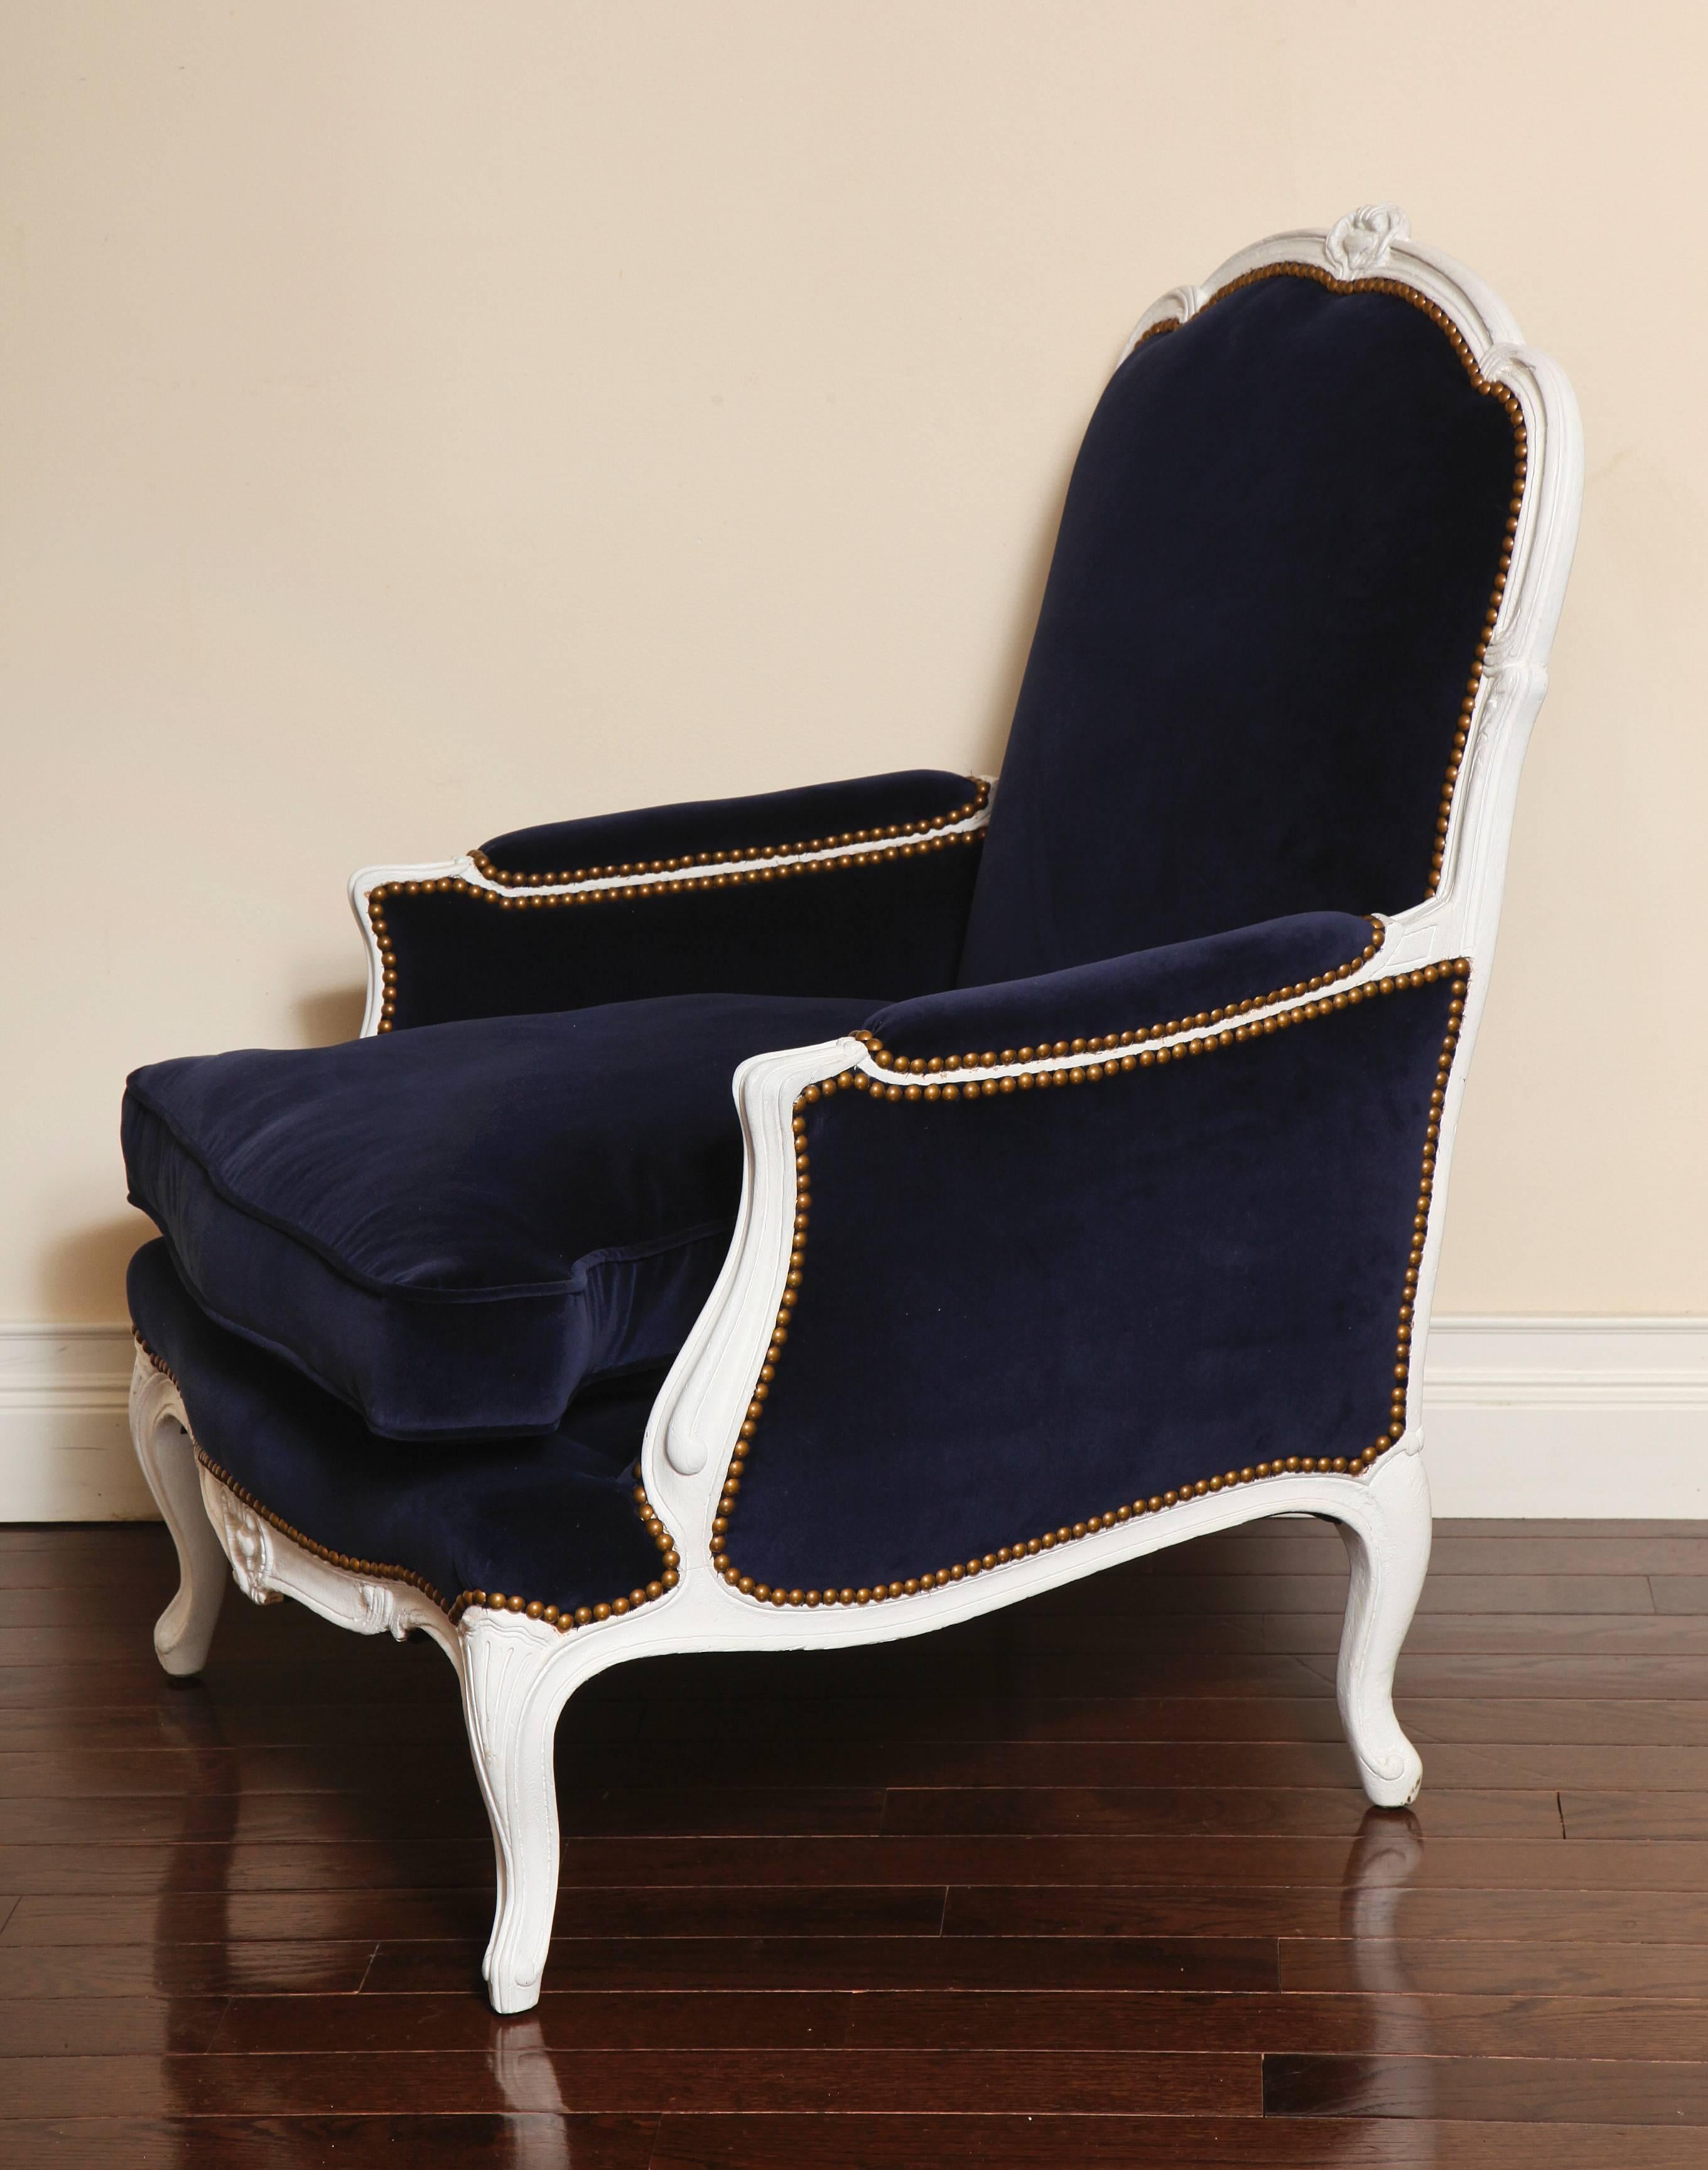 A beautifully proportioned French Louis XV style 19th century painted white bergère. The frame with cabriole legs and nicely carved cartouches on the crest and seat rail. The chair is newly upholstered in a rich dark blue velvet with antique brass